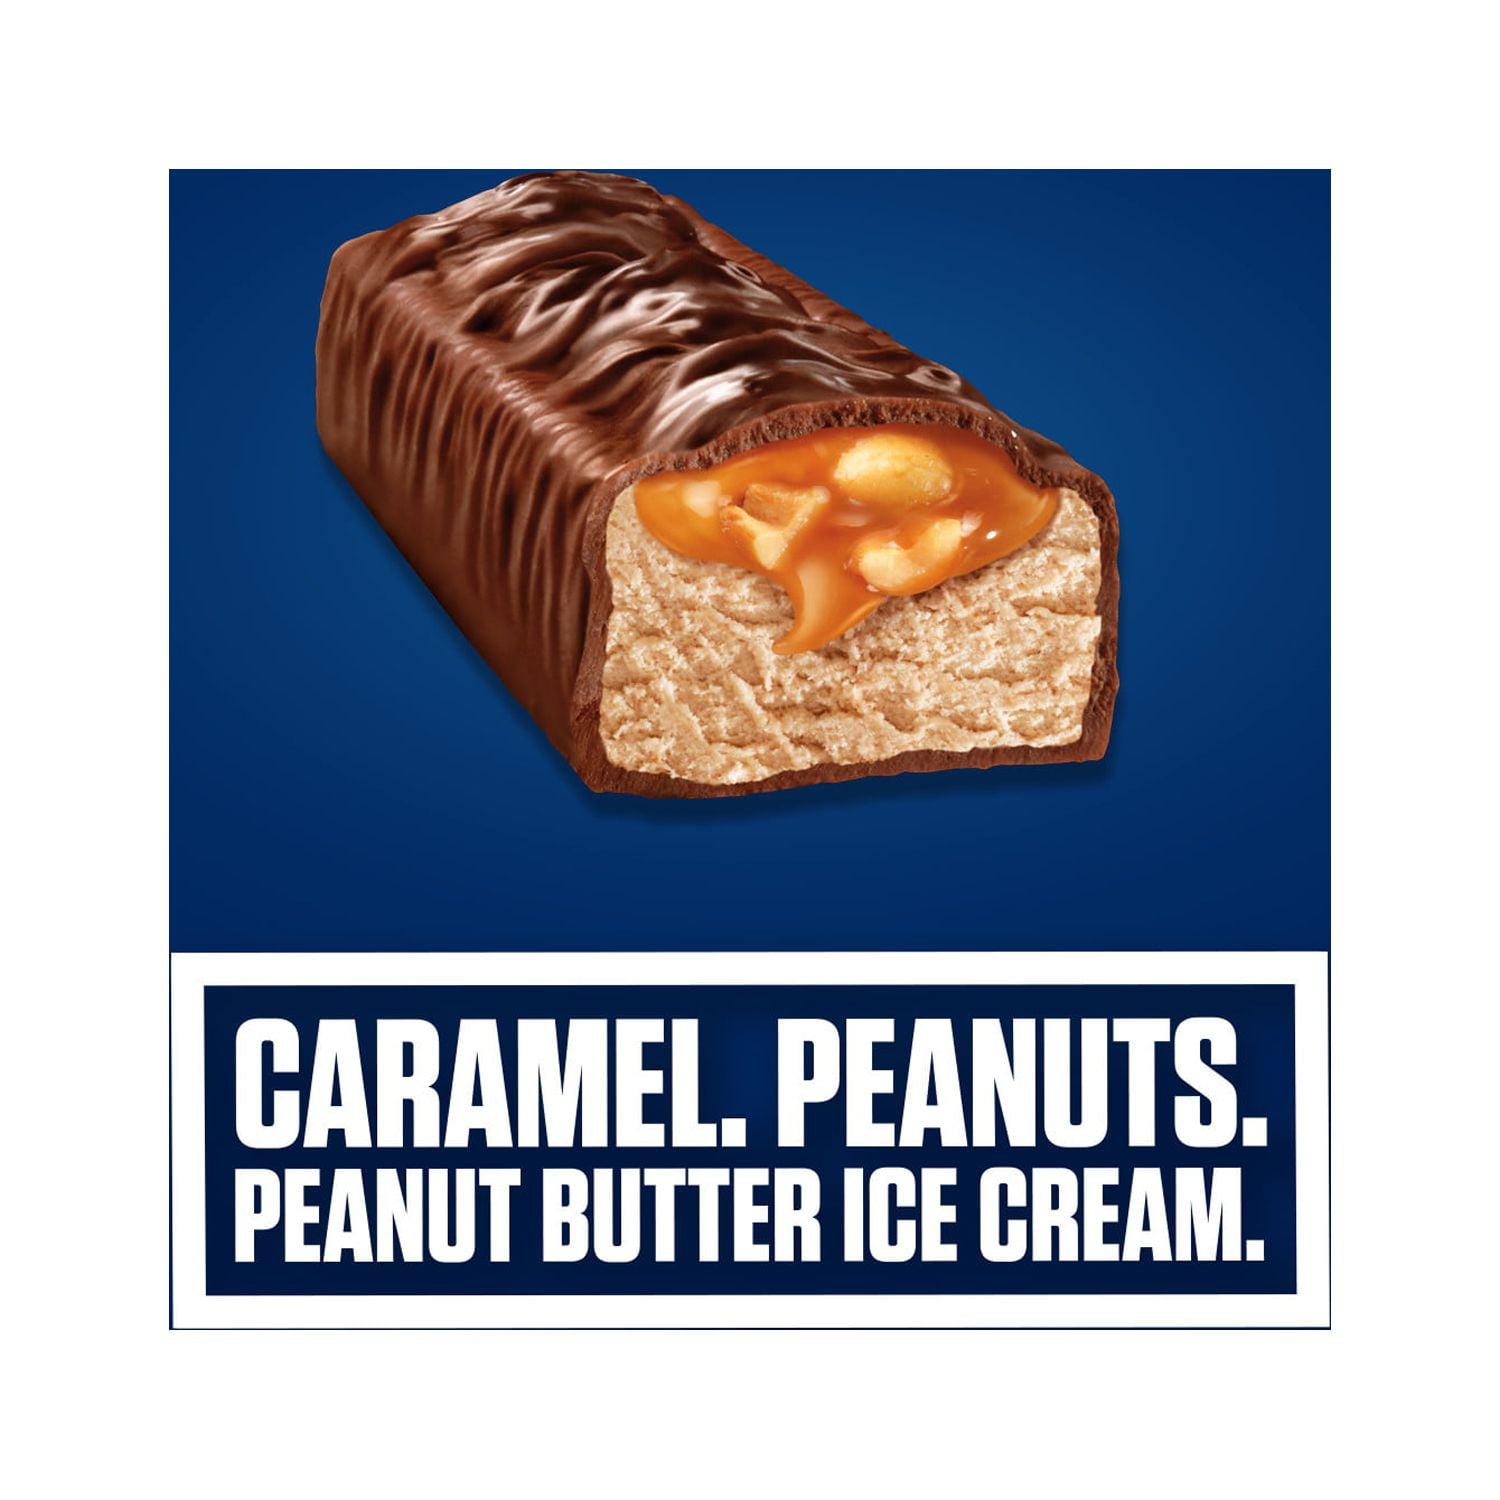 SNICKERS Ice Cream Bars, 12 ct - Fry's Food Stores